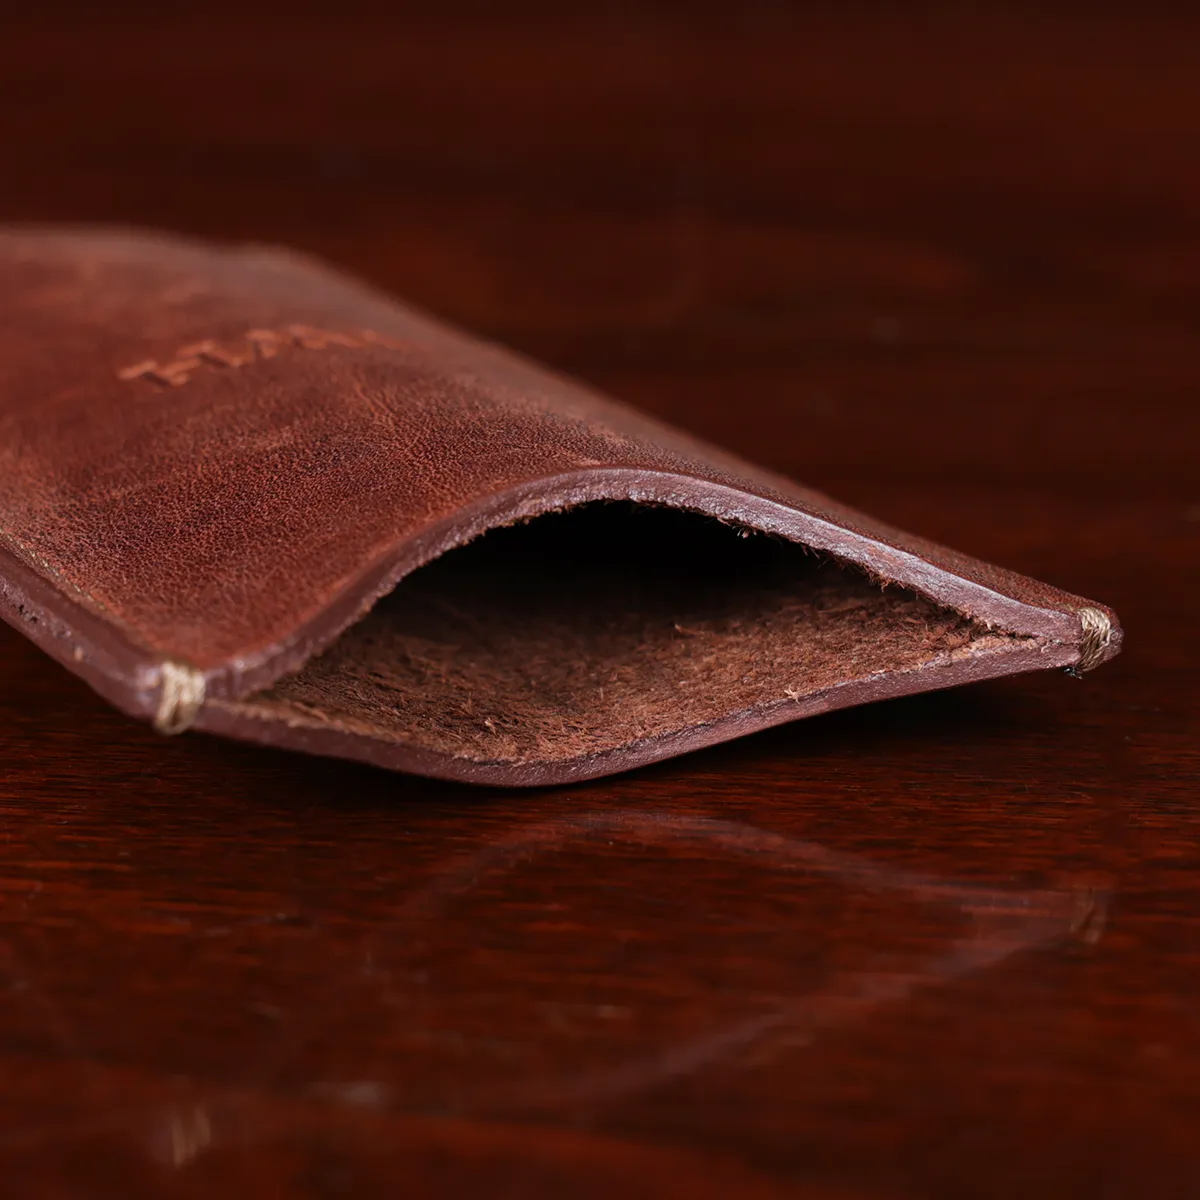 leather pencil case open on wooden table